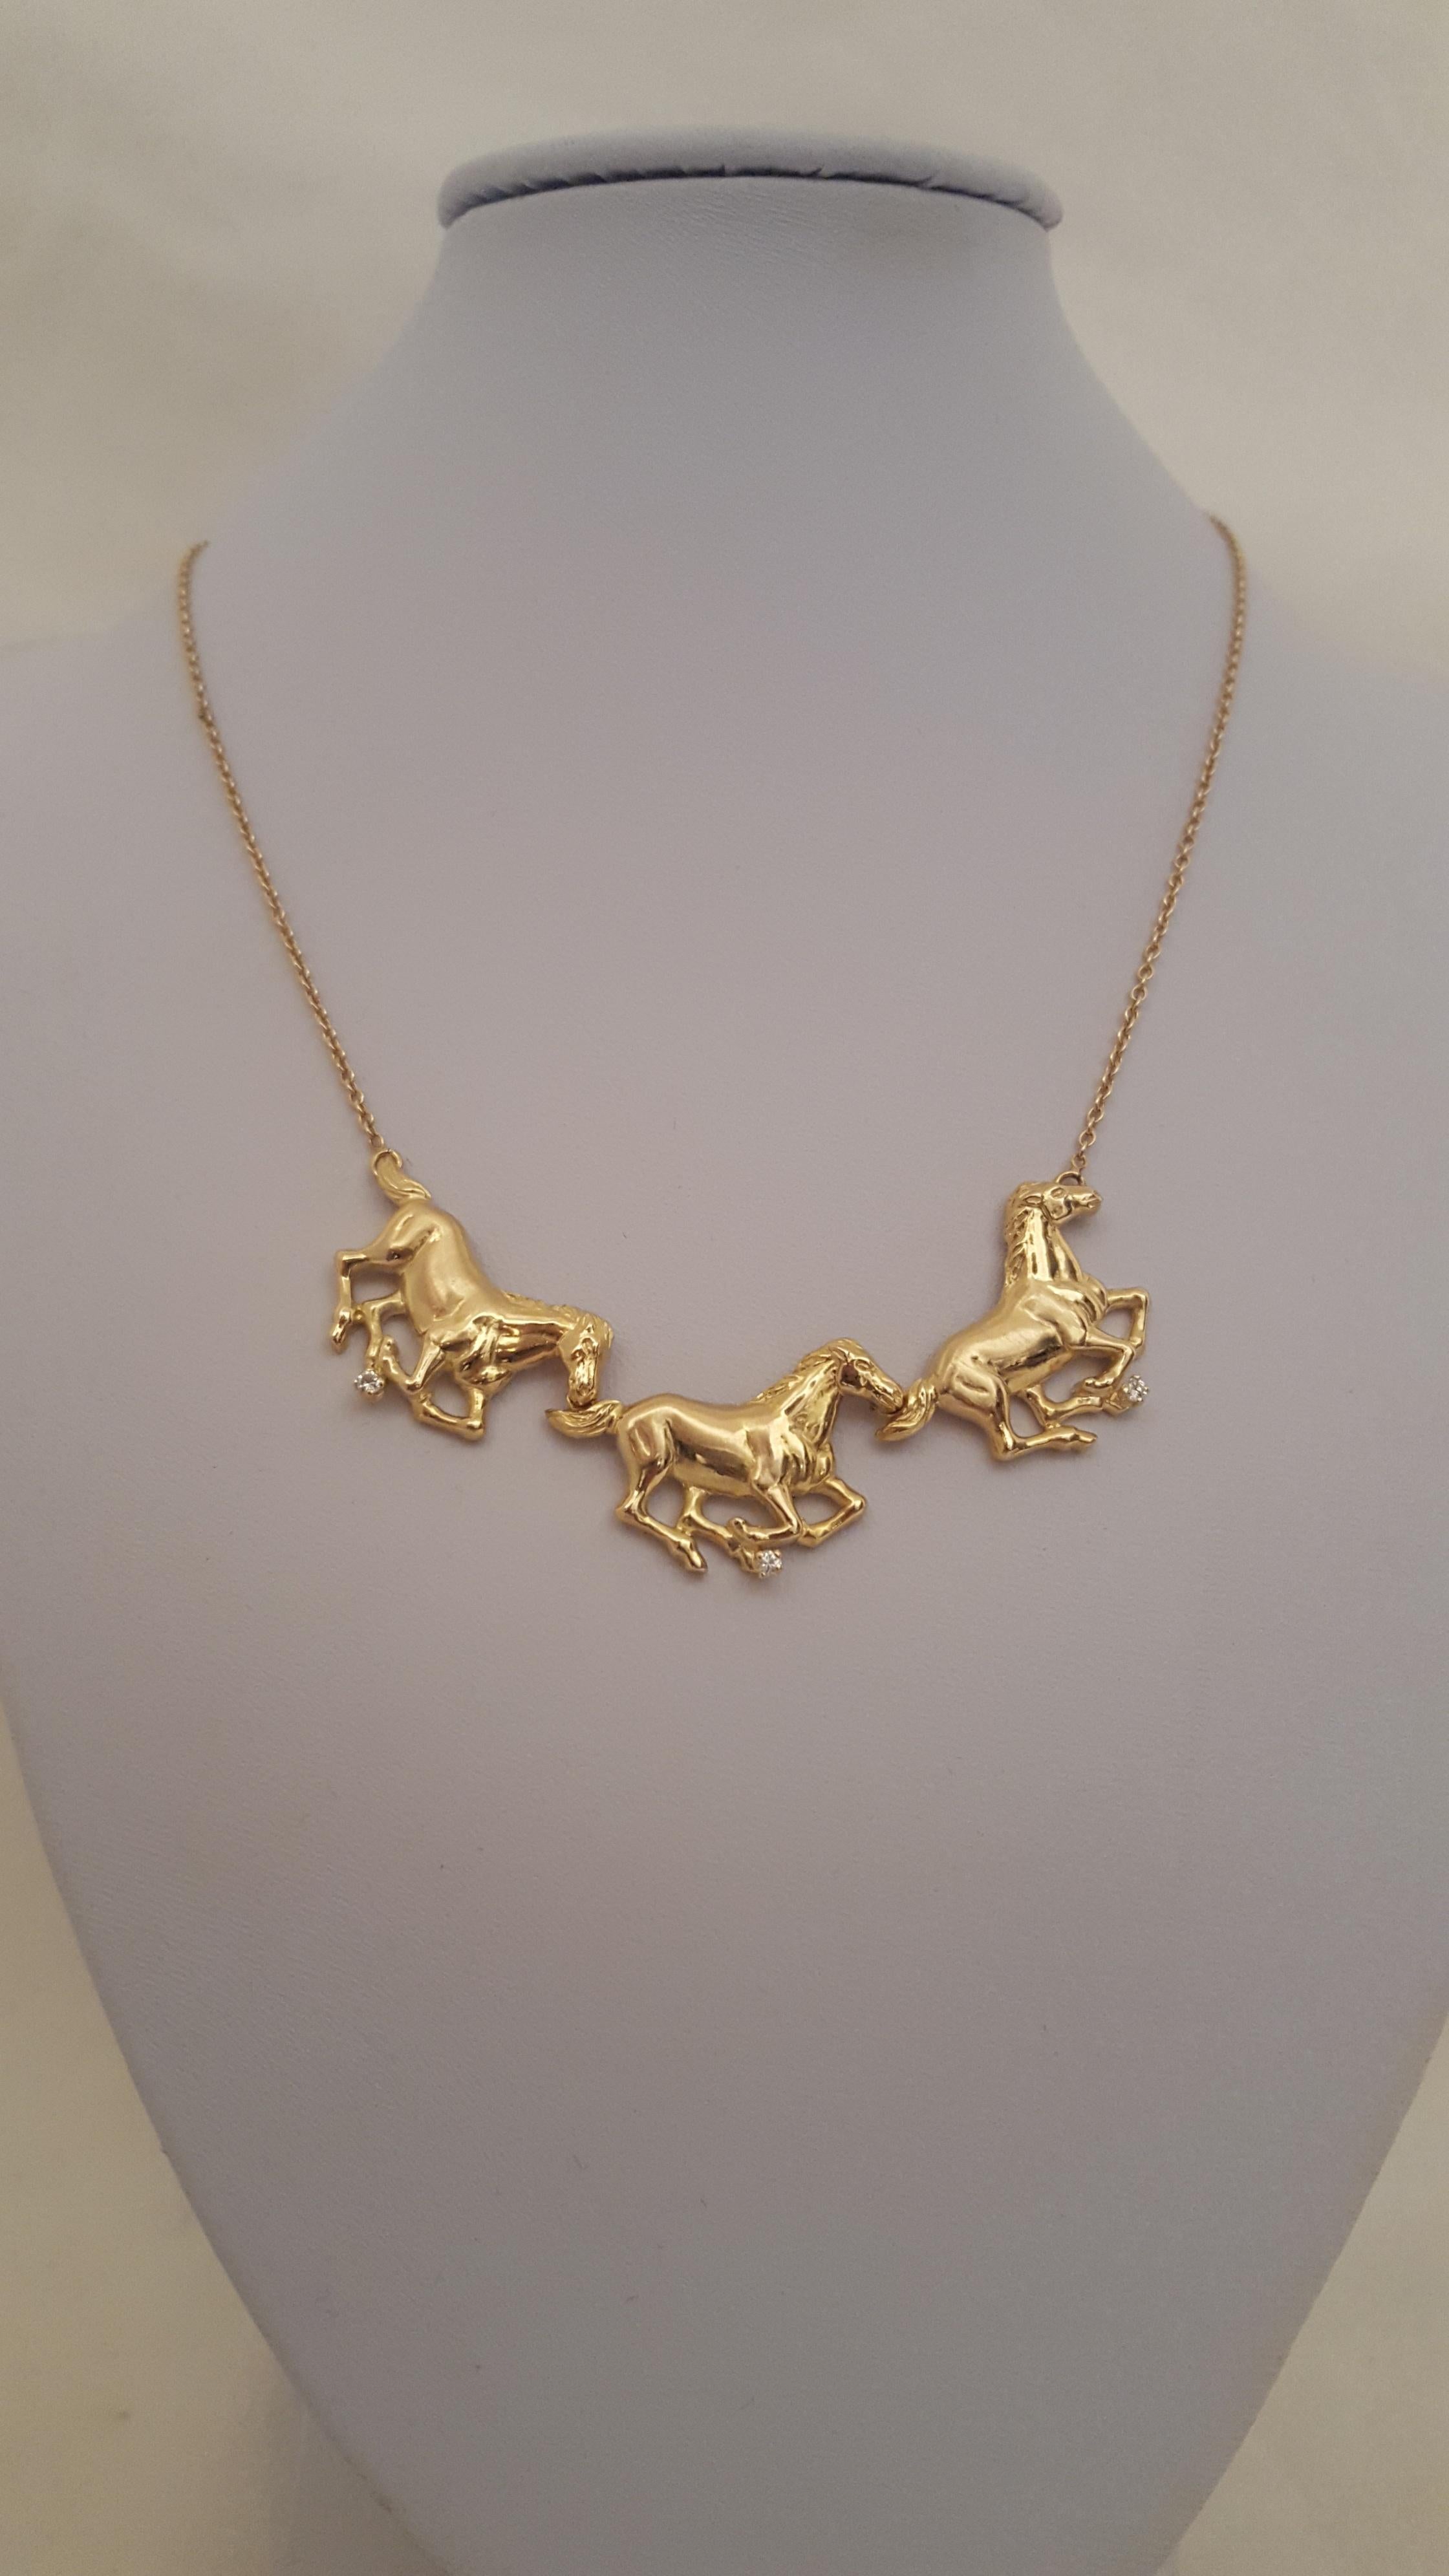 Every lover of fine jewelry worldwide is familiar with the iconic VCA logo!  We proudly offer an extremely rare piece from the 1950's.  Meticulously crafted in 18 karat yellow gold, this fantastic understated necklace features three detailed running